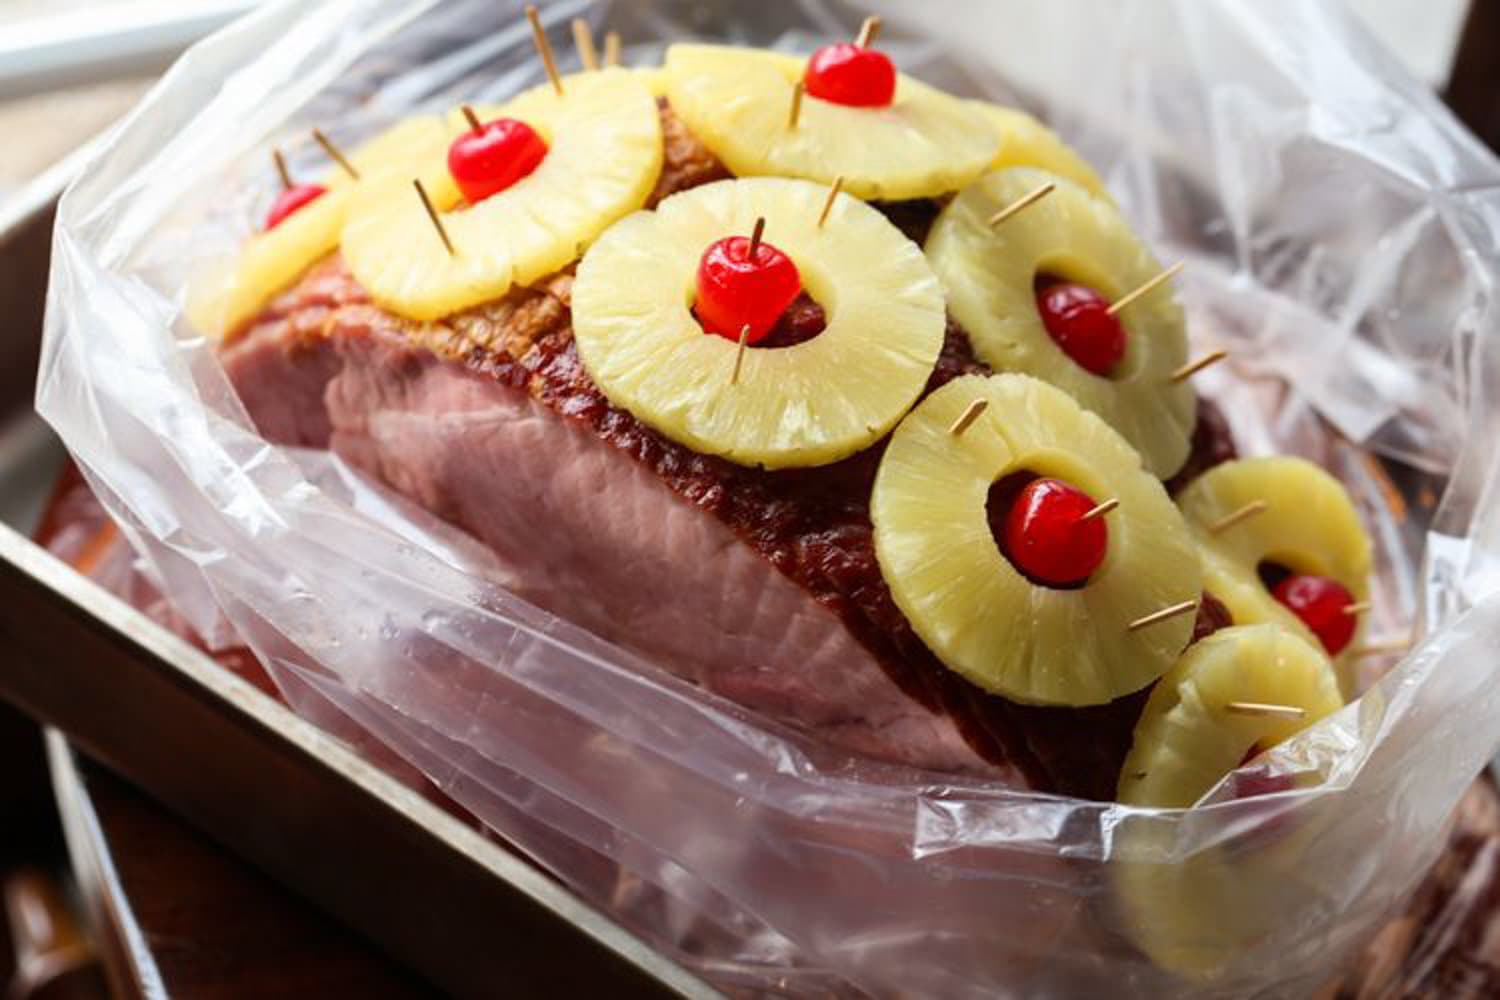 Pineapple ham in an oven bag